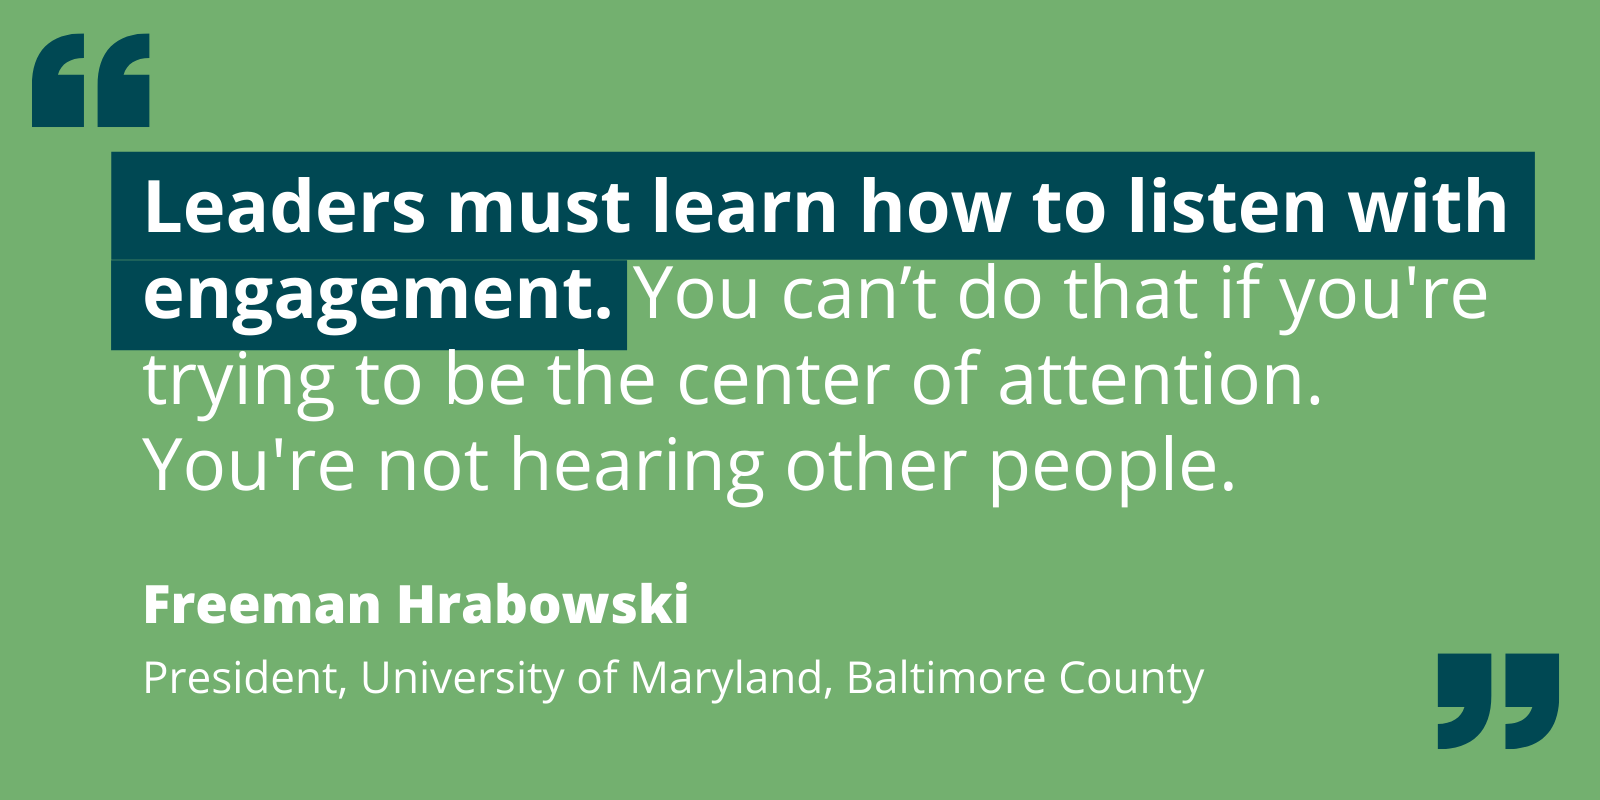 Quote by Freeman Hrabowski re: how leaders should listen with engagement instead of trying to be the center of attention.